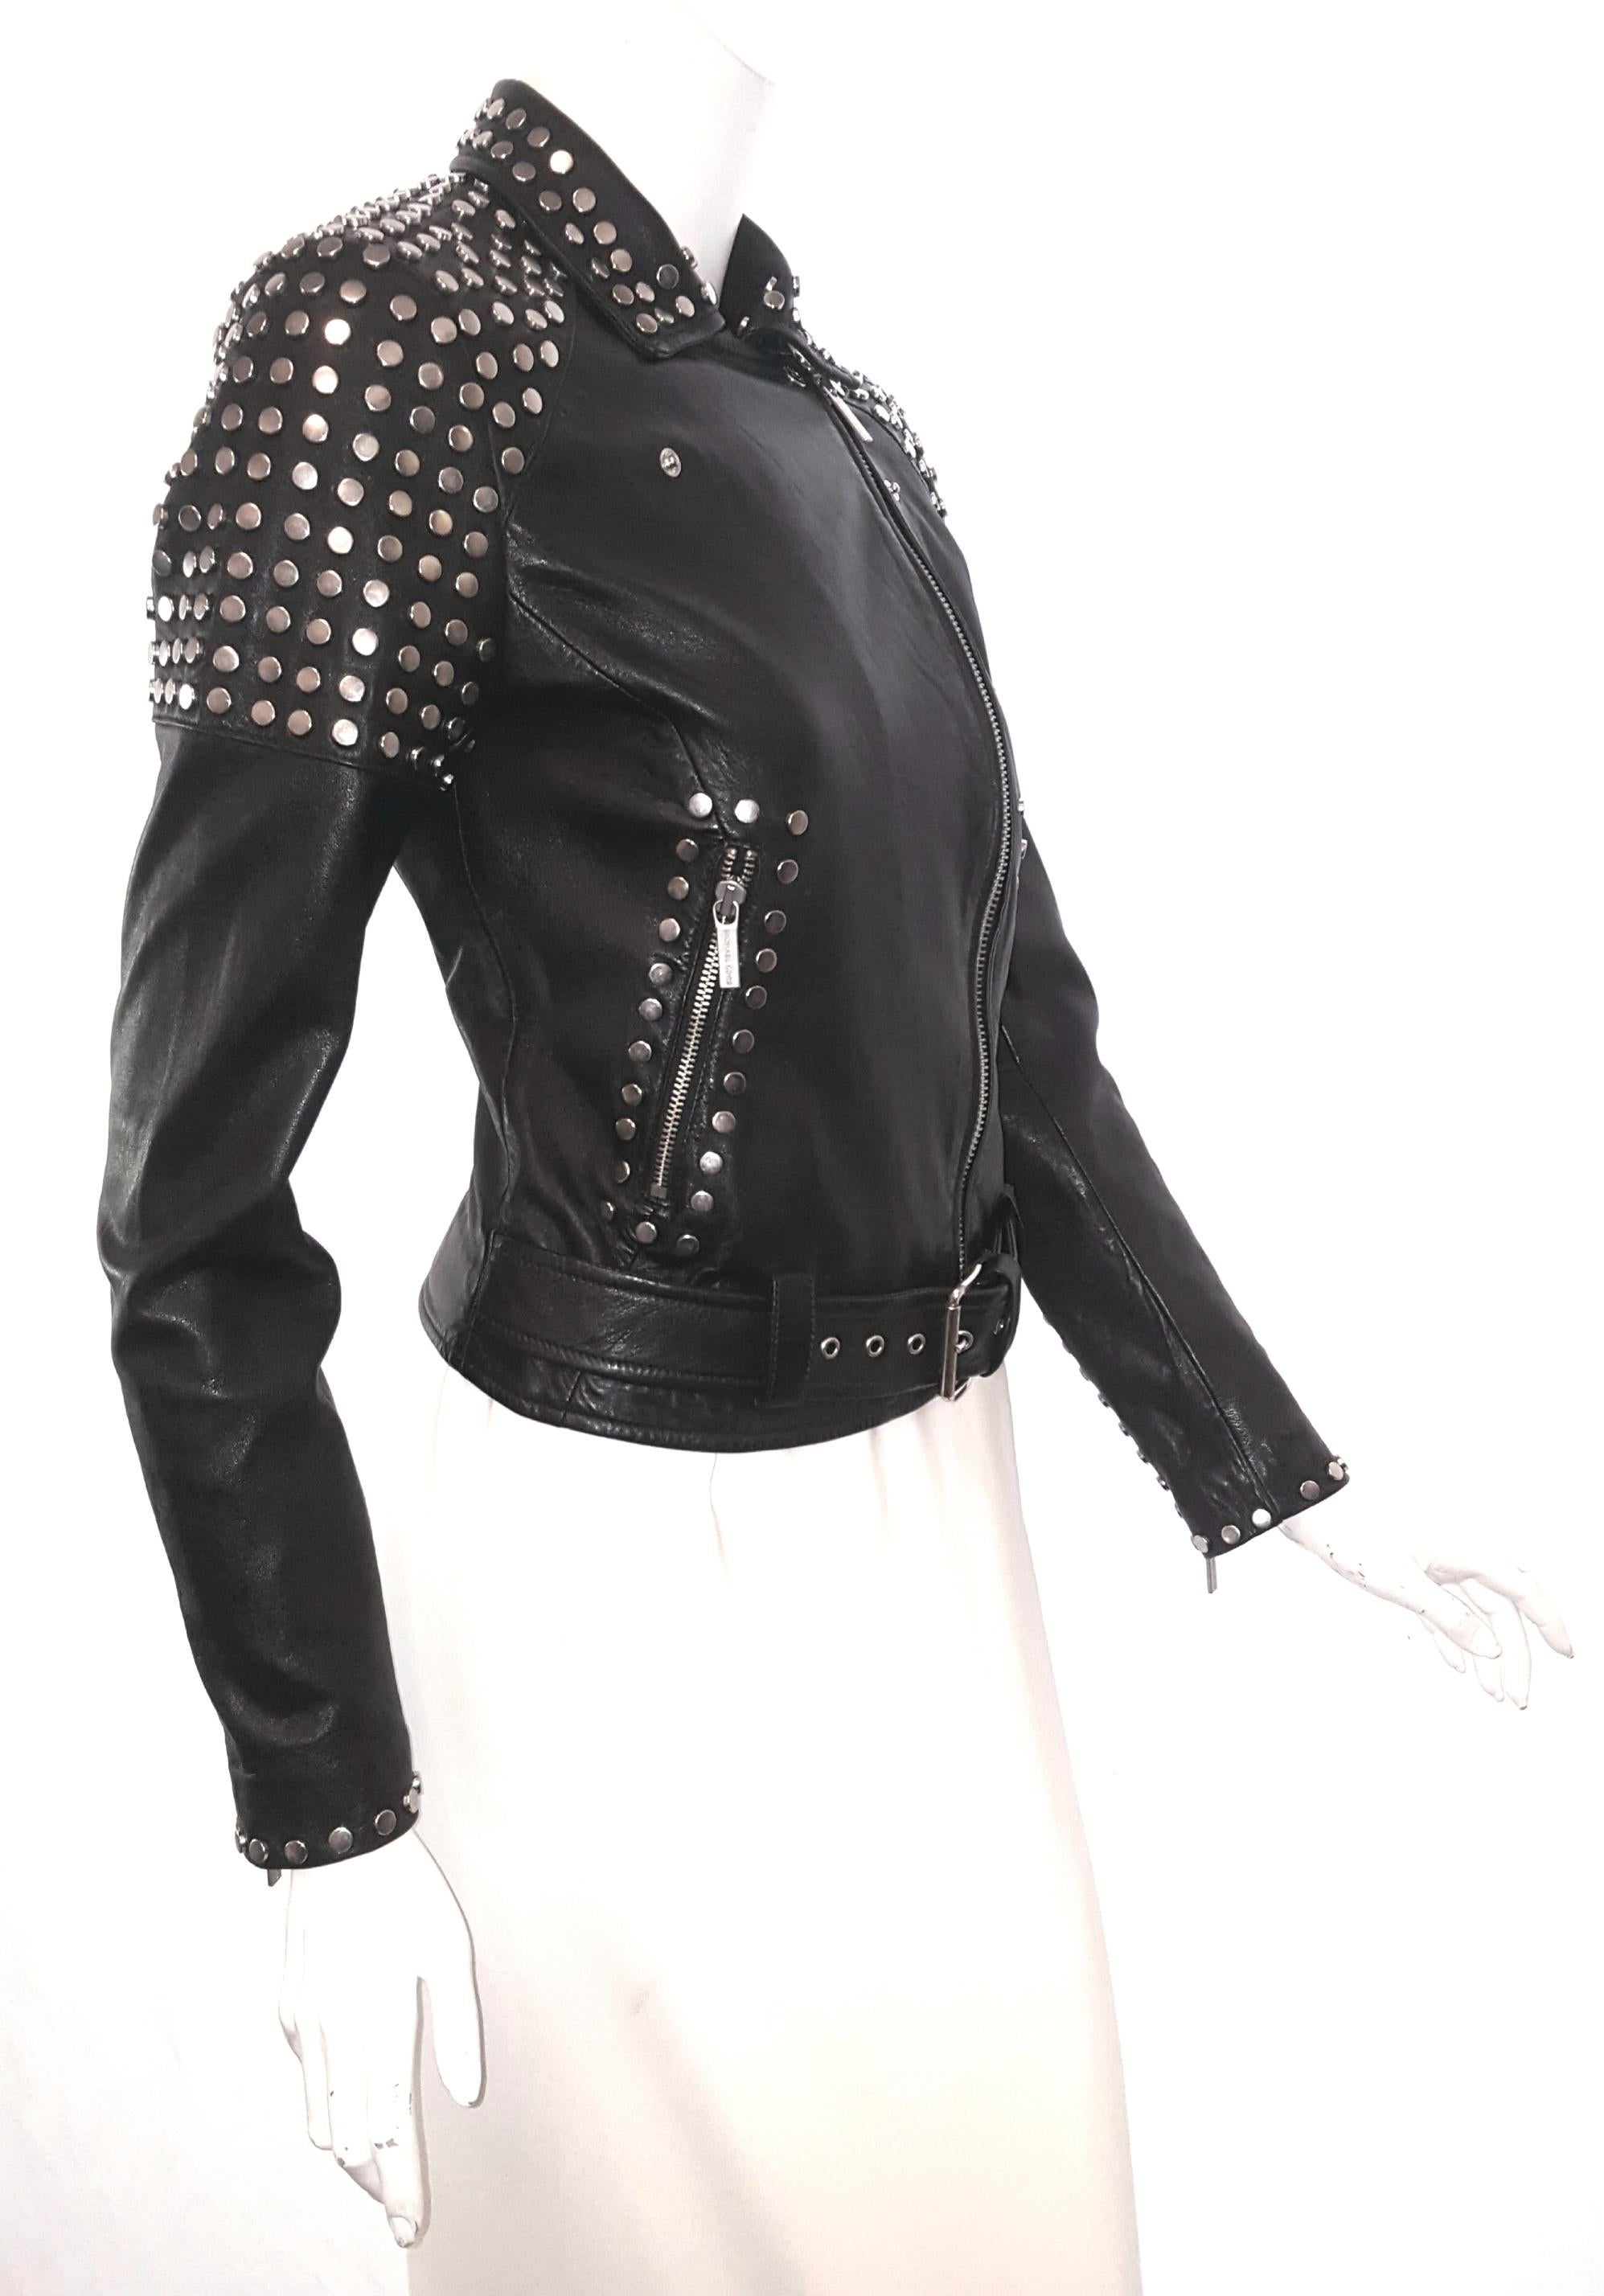 Brand new Michael Kors silver studded black leather bomber jacket with notch collar and belt at front.  Two zippered slit pockets, zippered cuffs and asymmetric zipper at front for closure finishes this classic trendy look.  This jacket is covered